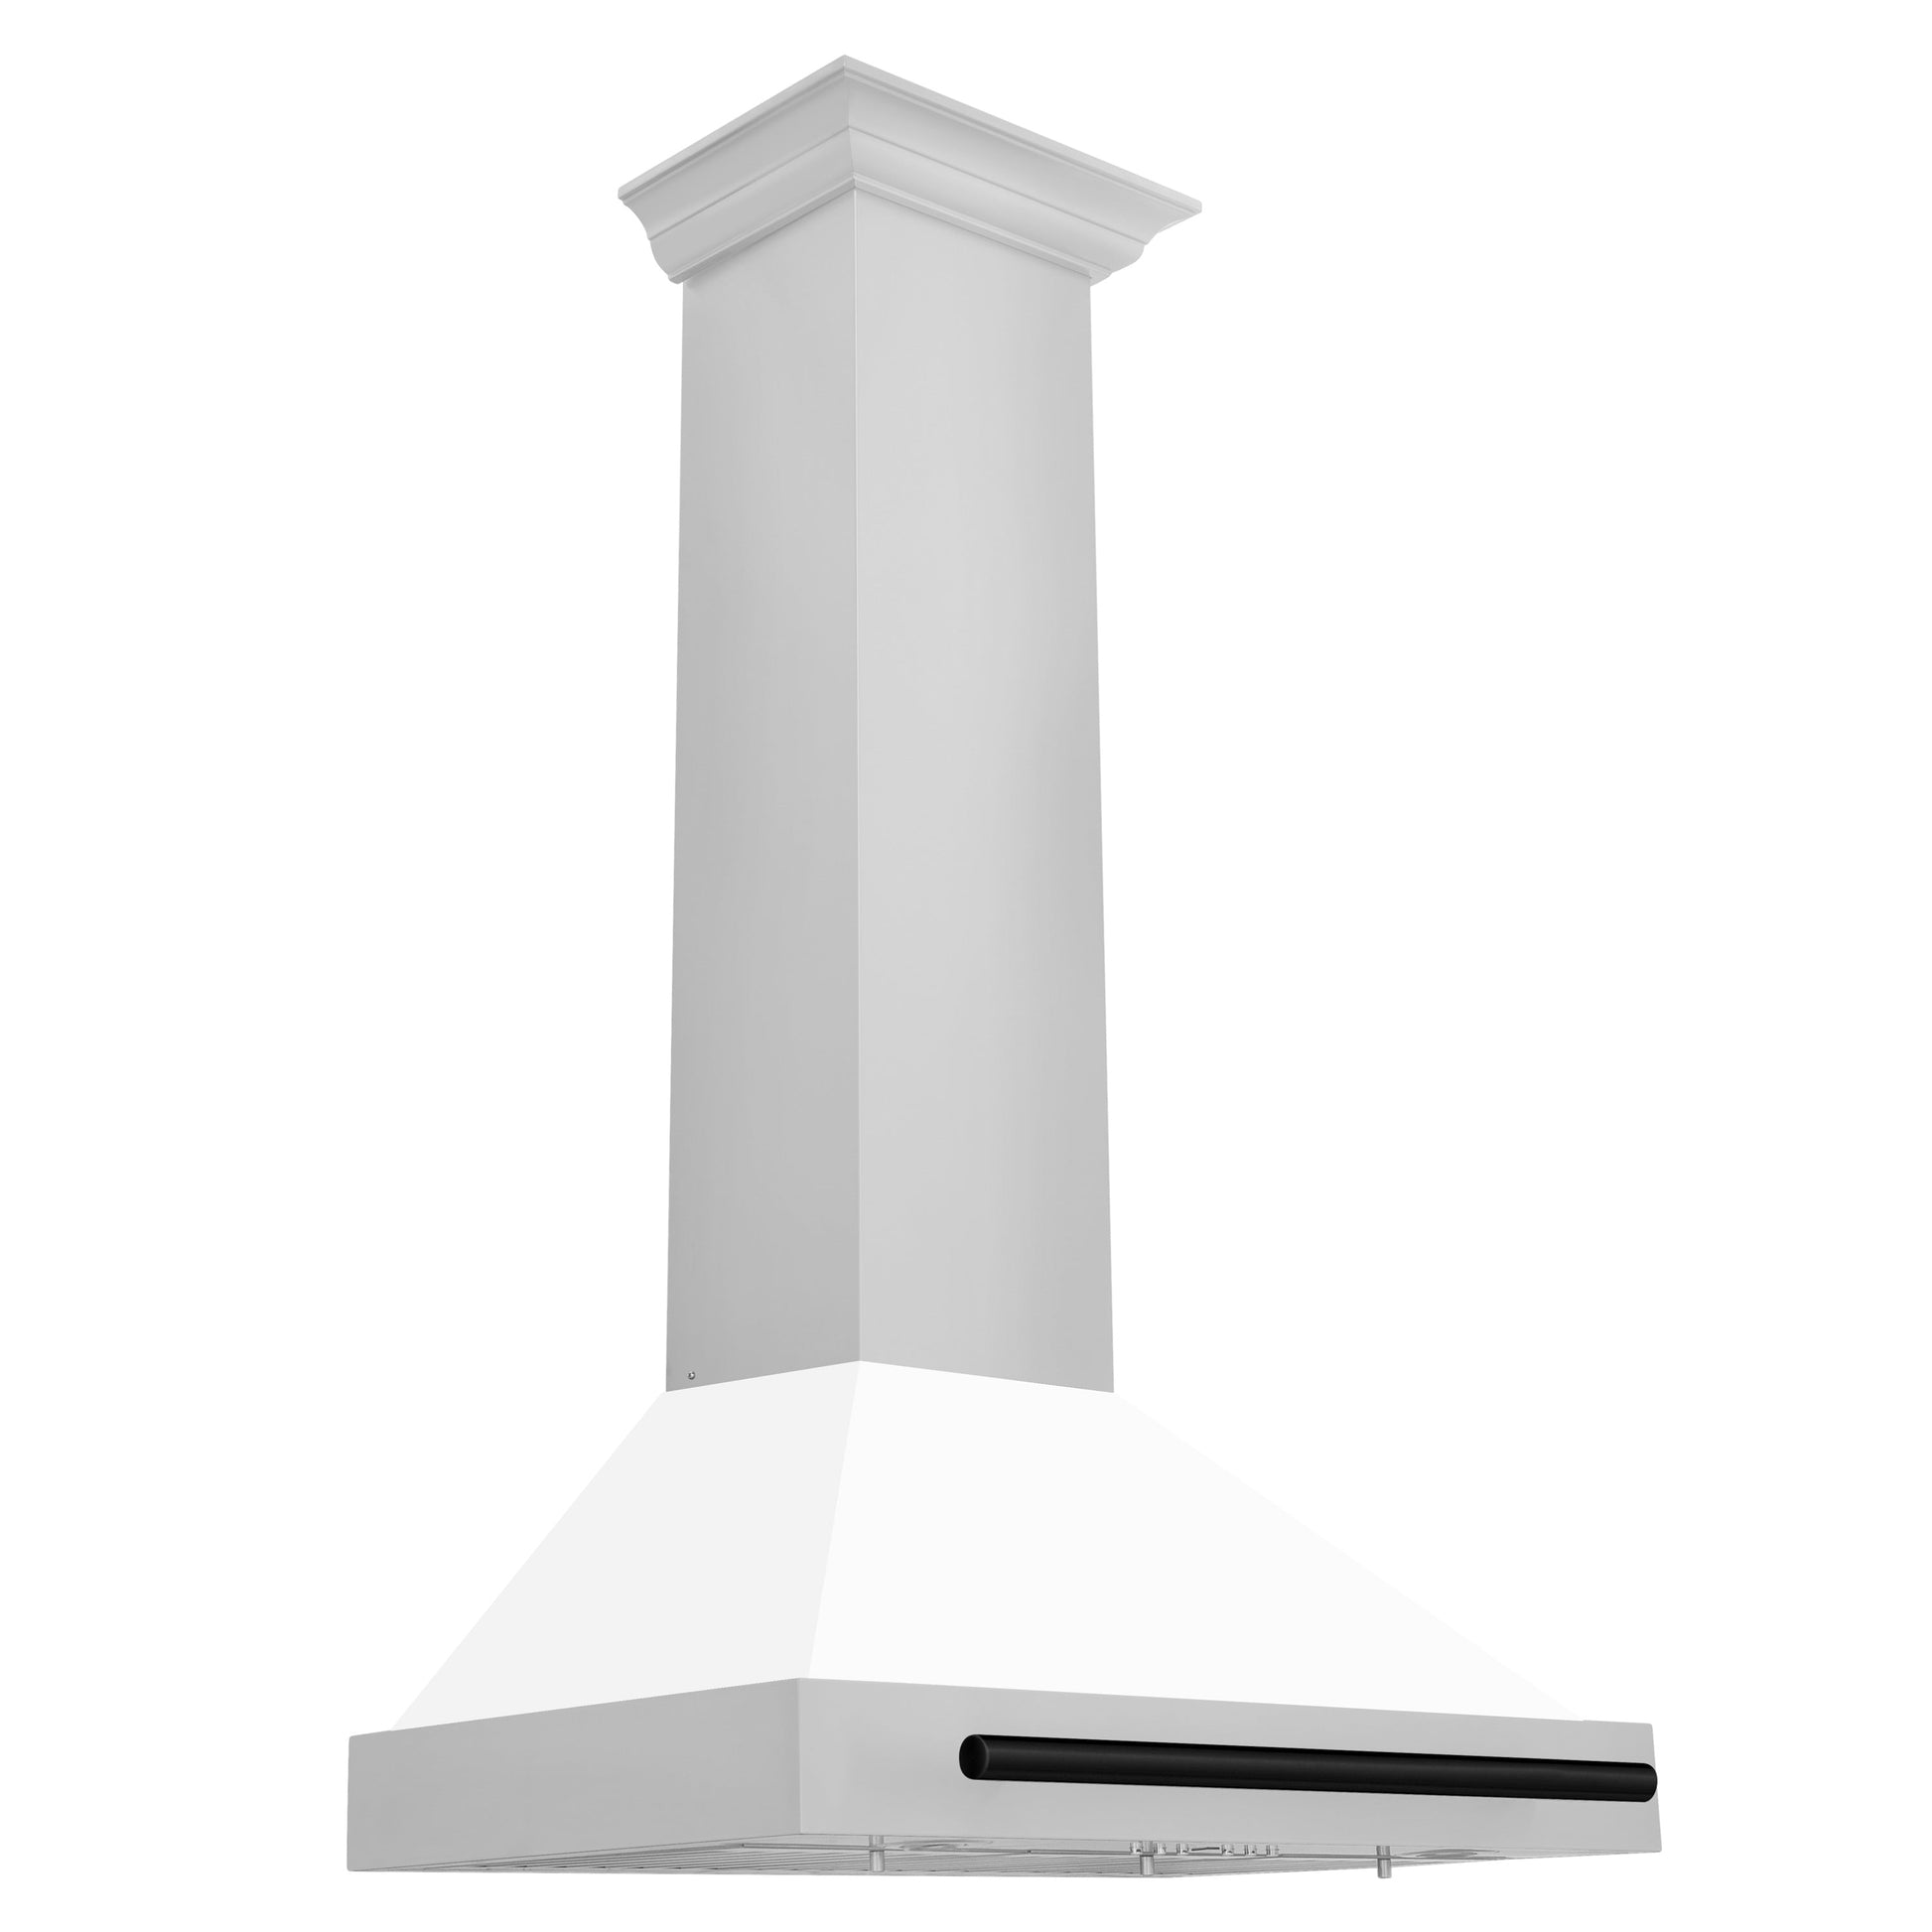 ZLINE 30" Autograph Edition Stainless Steel Range Hood - Matte White Shell & Accents